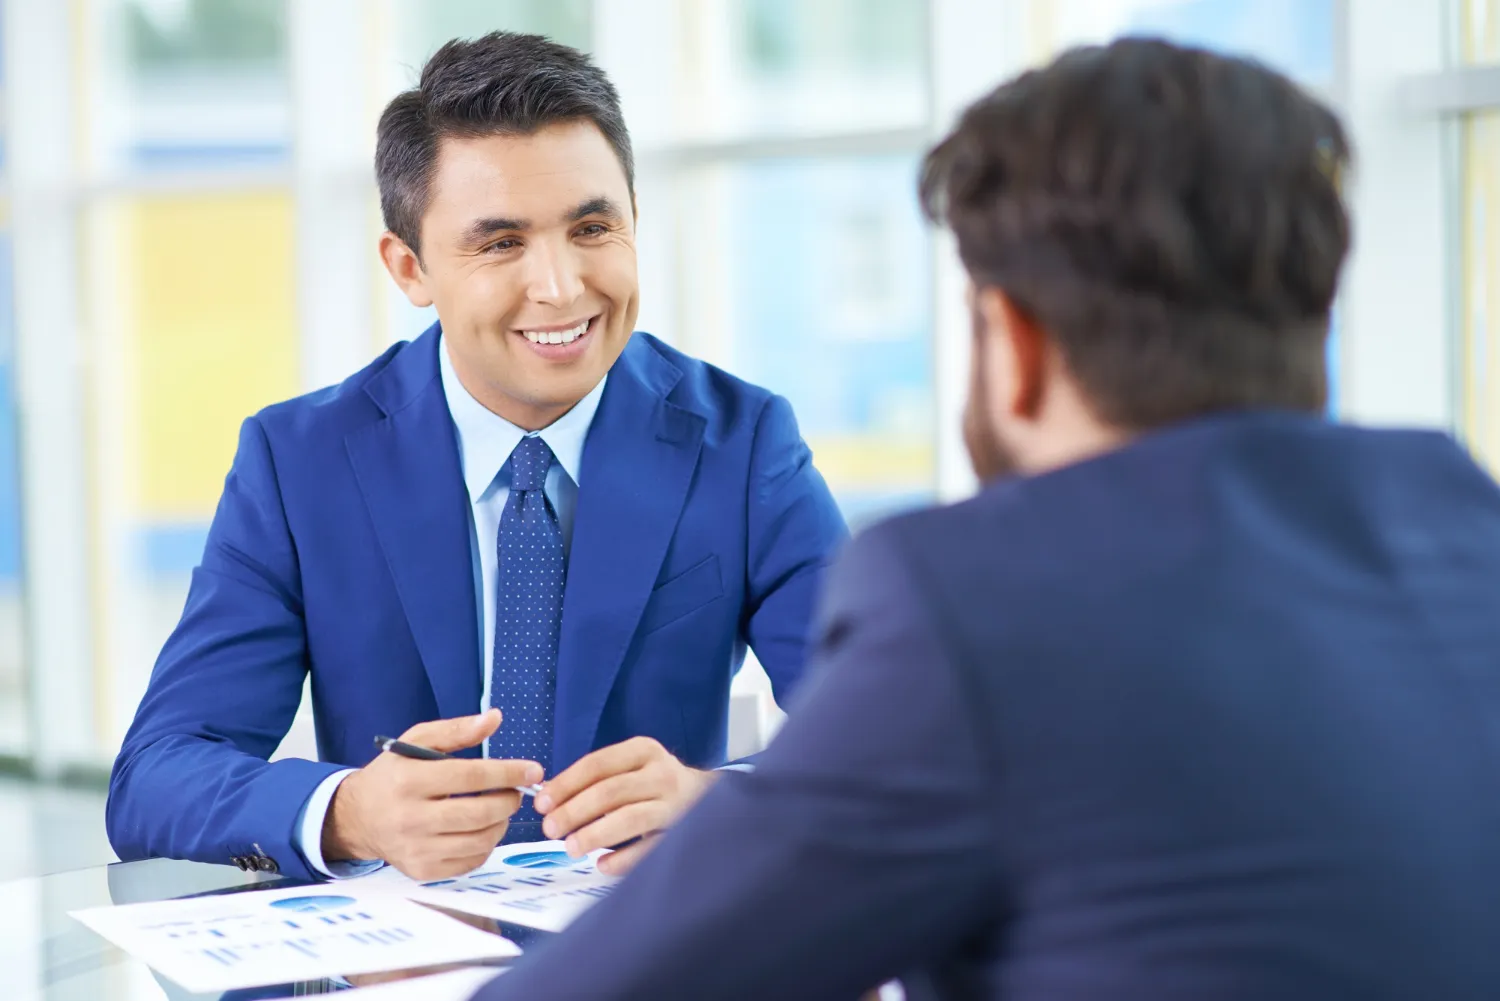 A smiling professional in a blue suit conversing with a colleague, representing the positive impact of effective feedback techniques offered by JOH Partners.